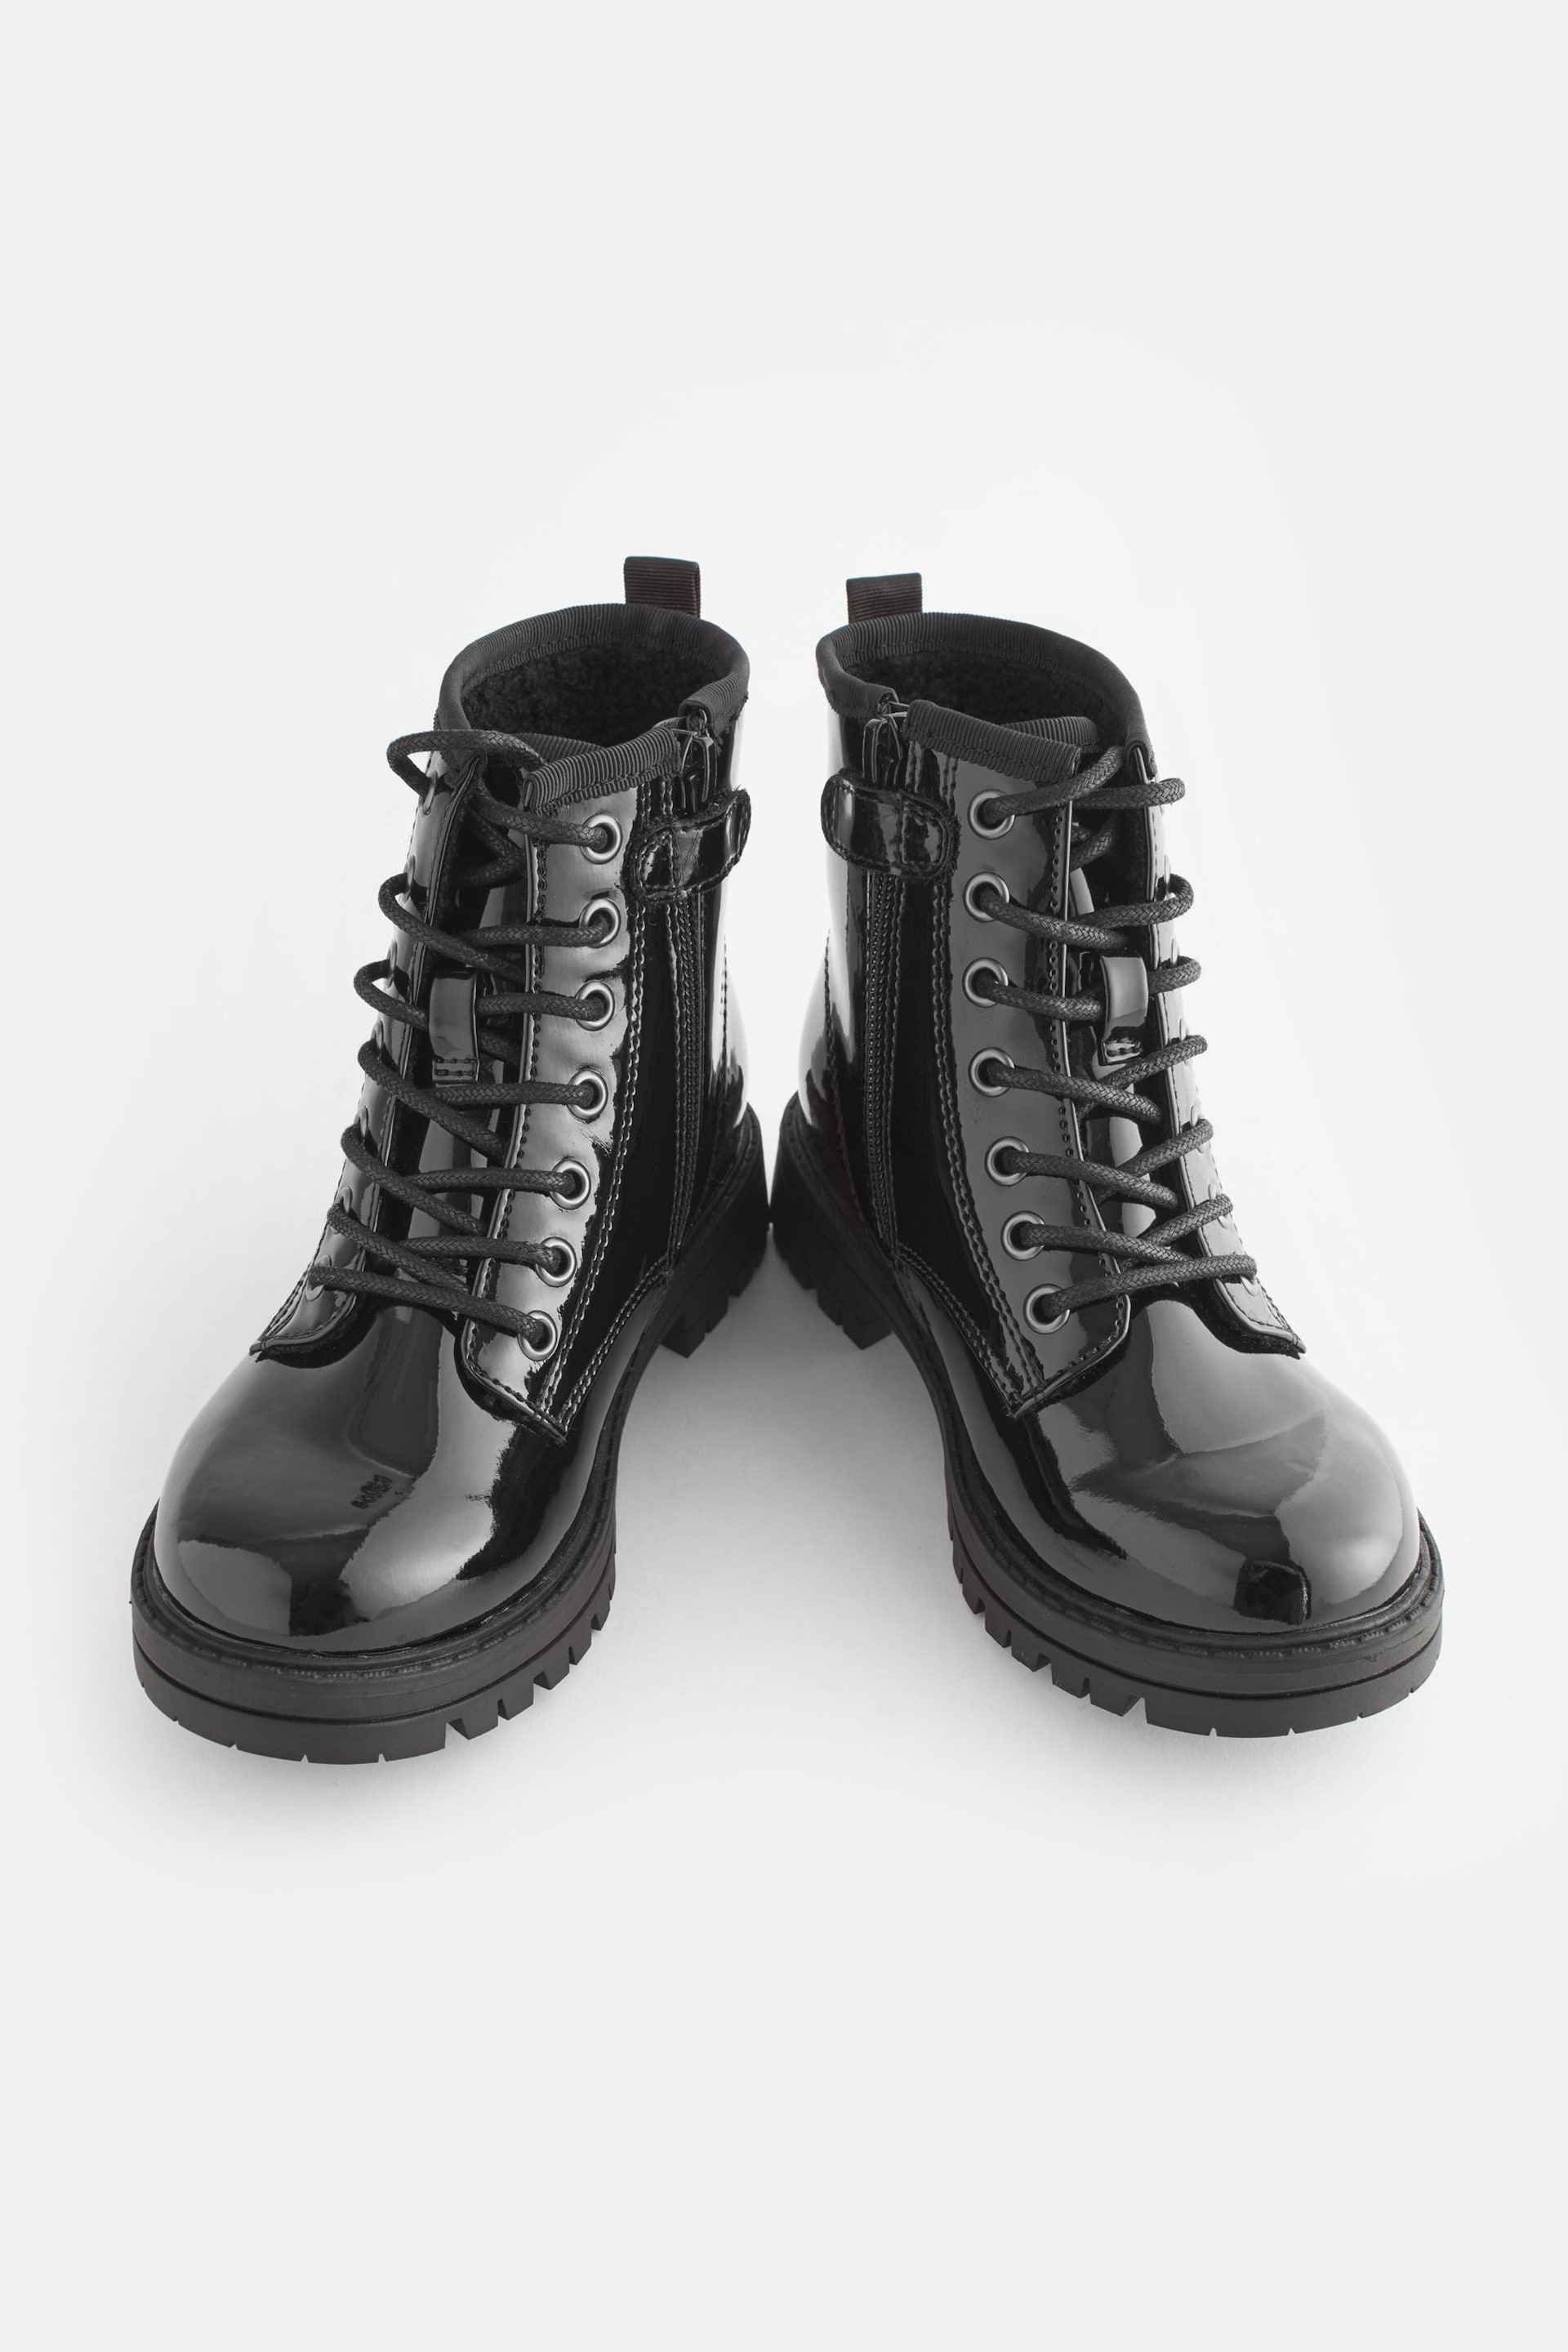 Black Patent Standard Fit (F) Warm Lined Lace-Up Boots - Image 4 of 7